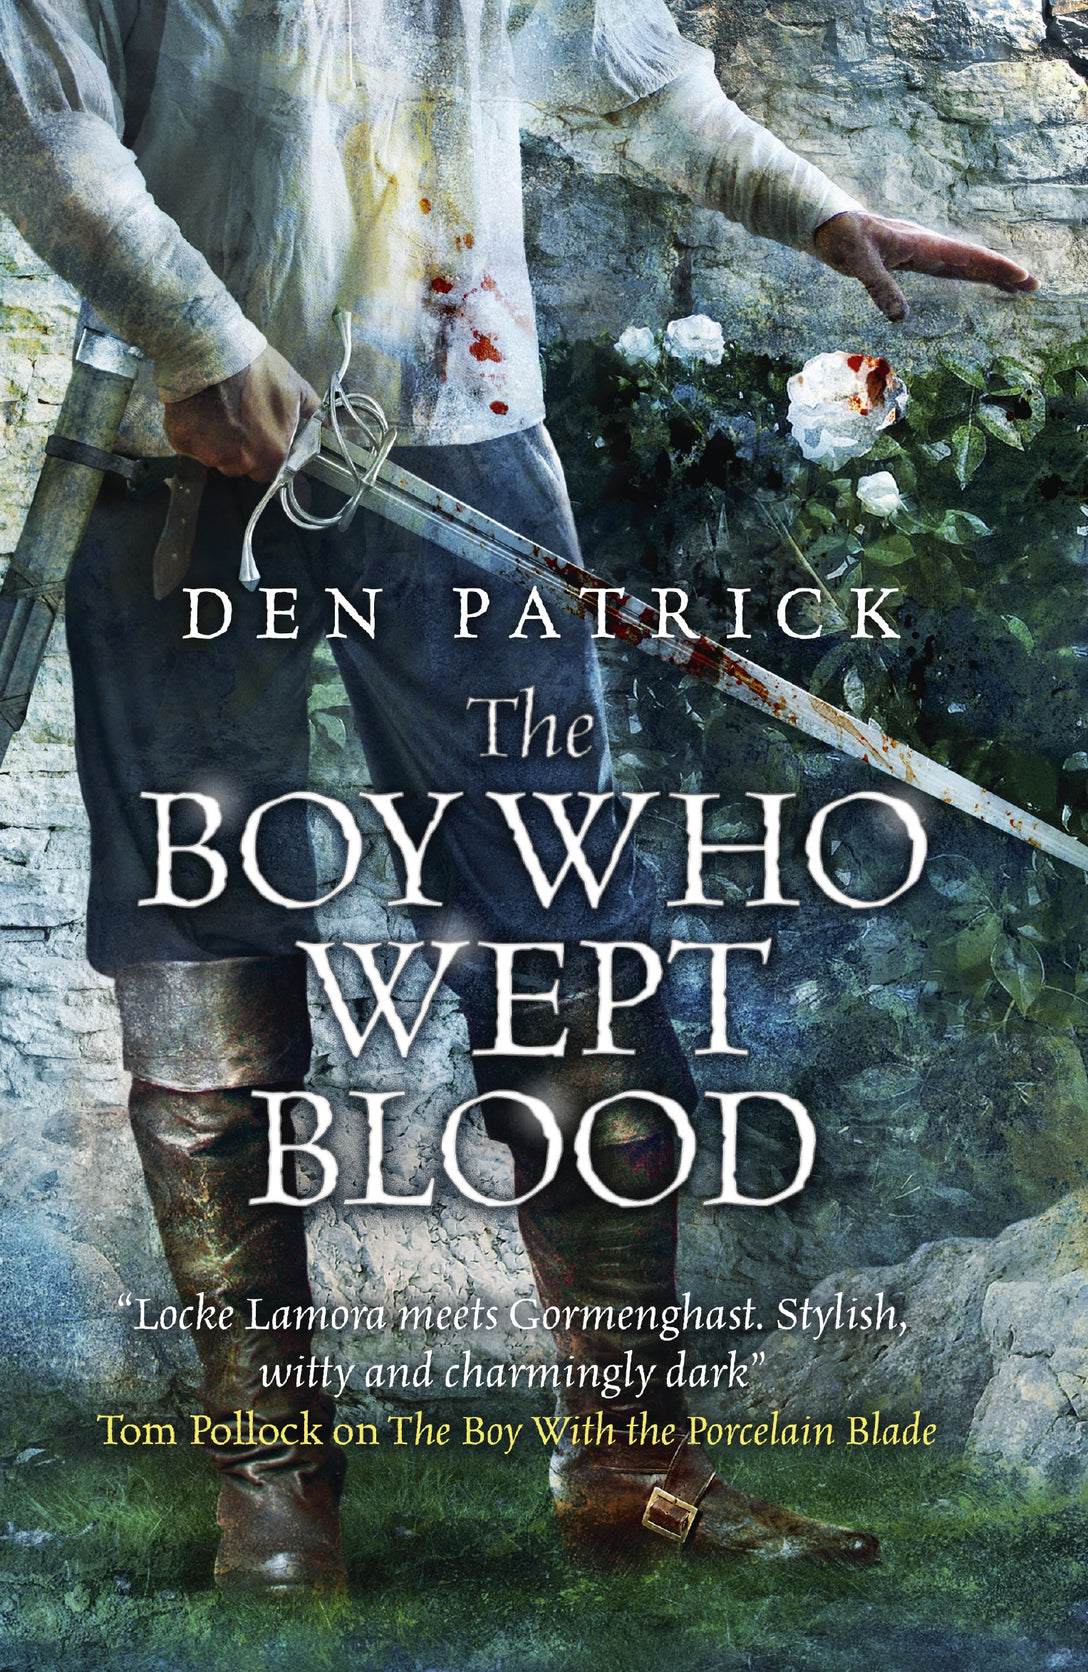 The Boy Who Wept Blood by Den Patrick